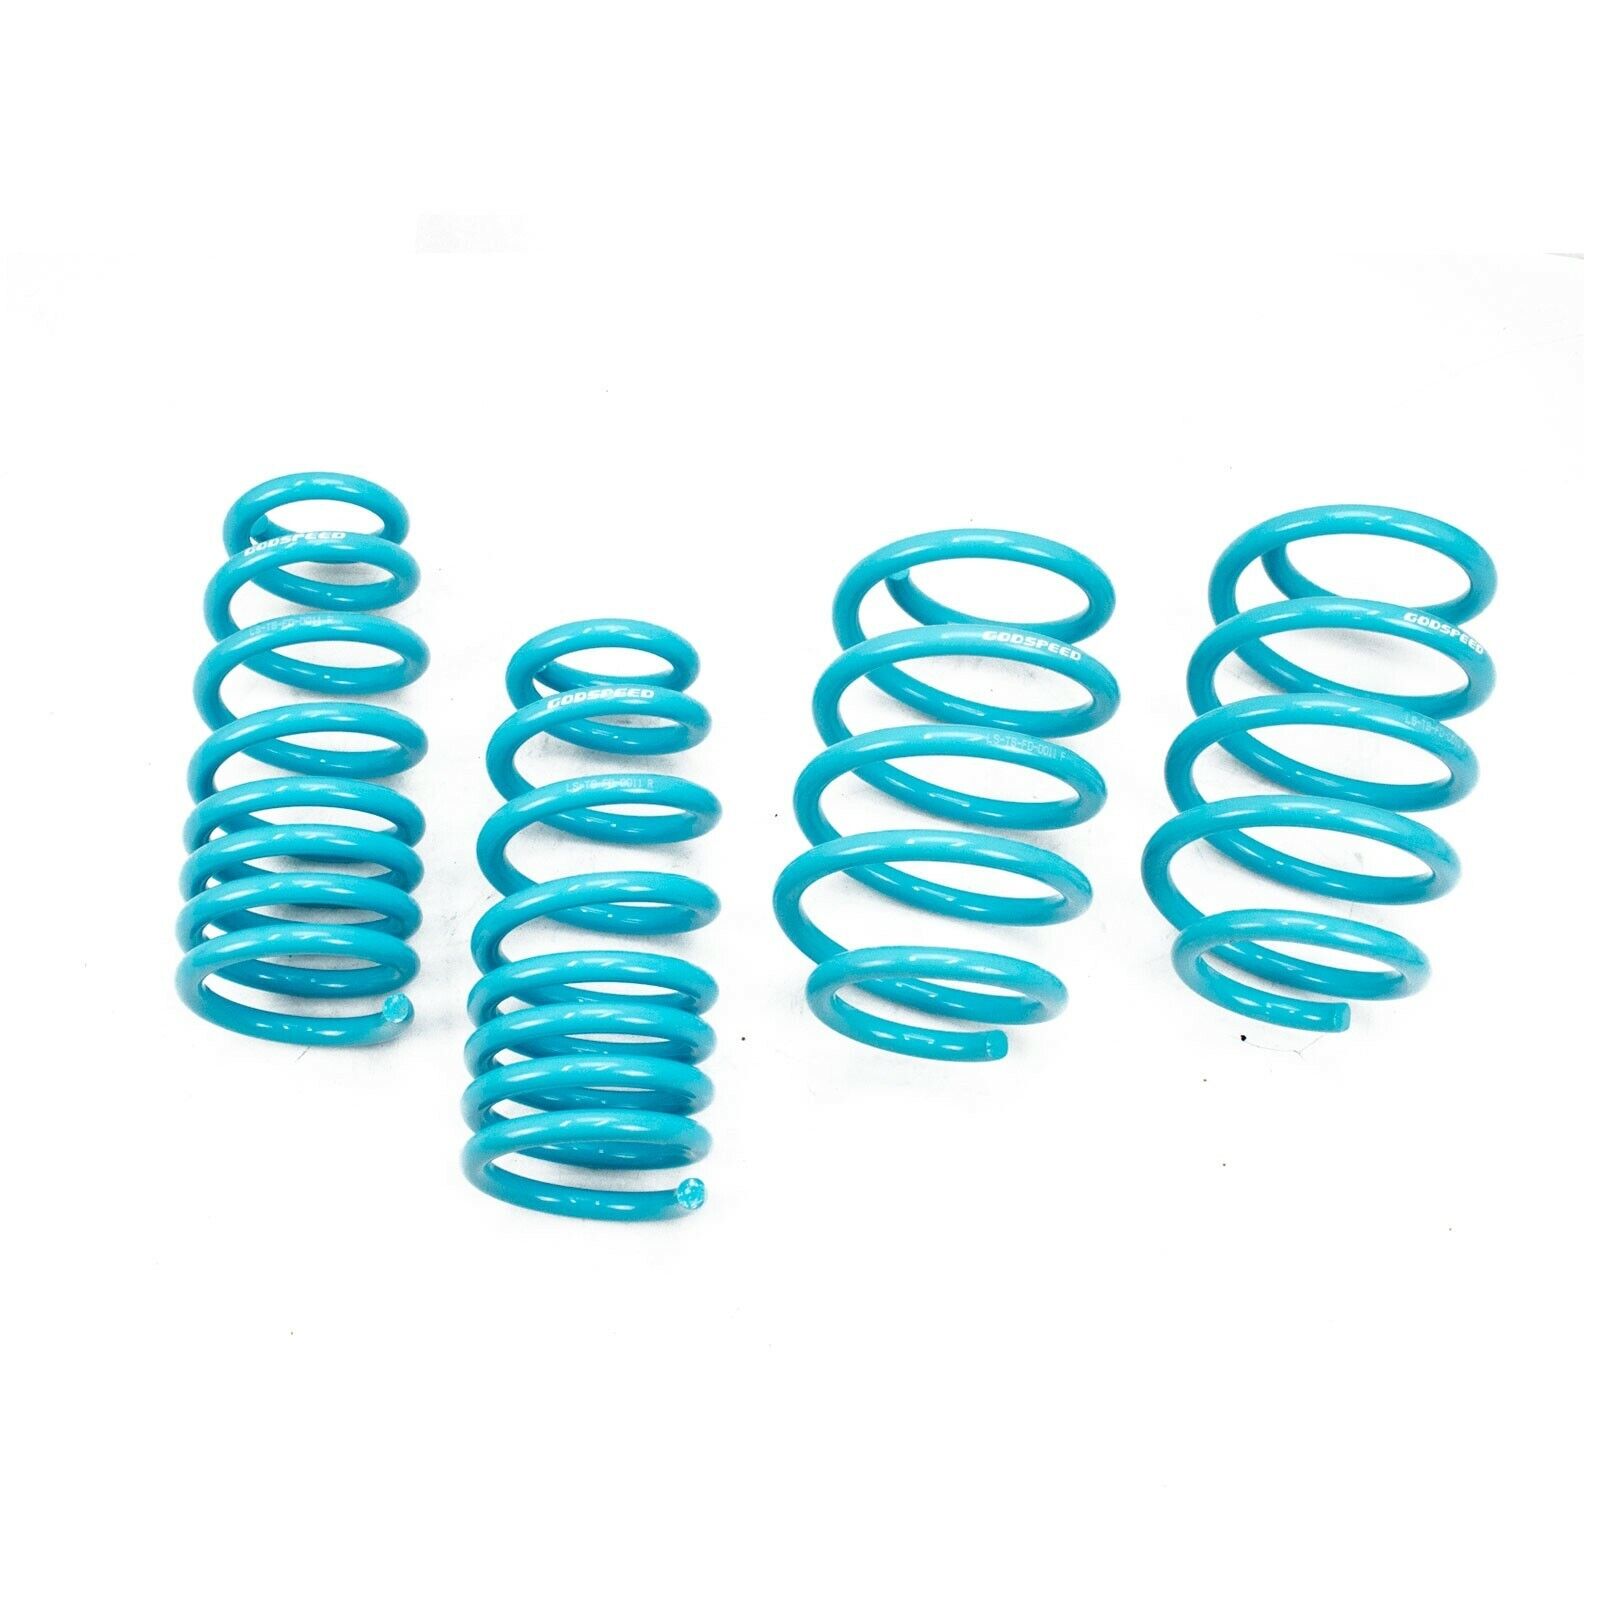 GODSPEED PERFORMANCE TRACTION-S LOWERING SPRINGS KIT FOR FORD TAURUS 2010-2019